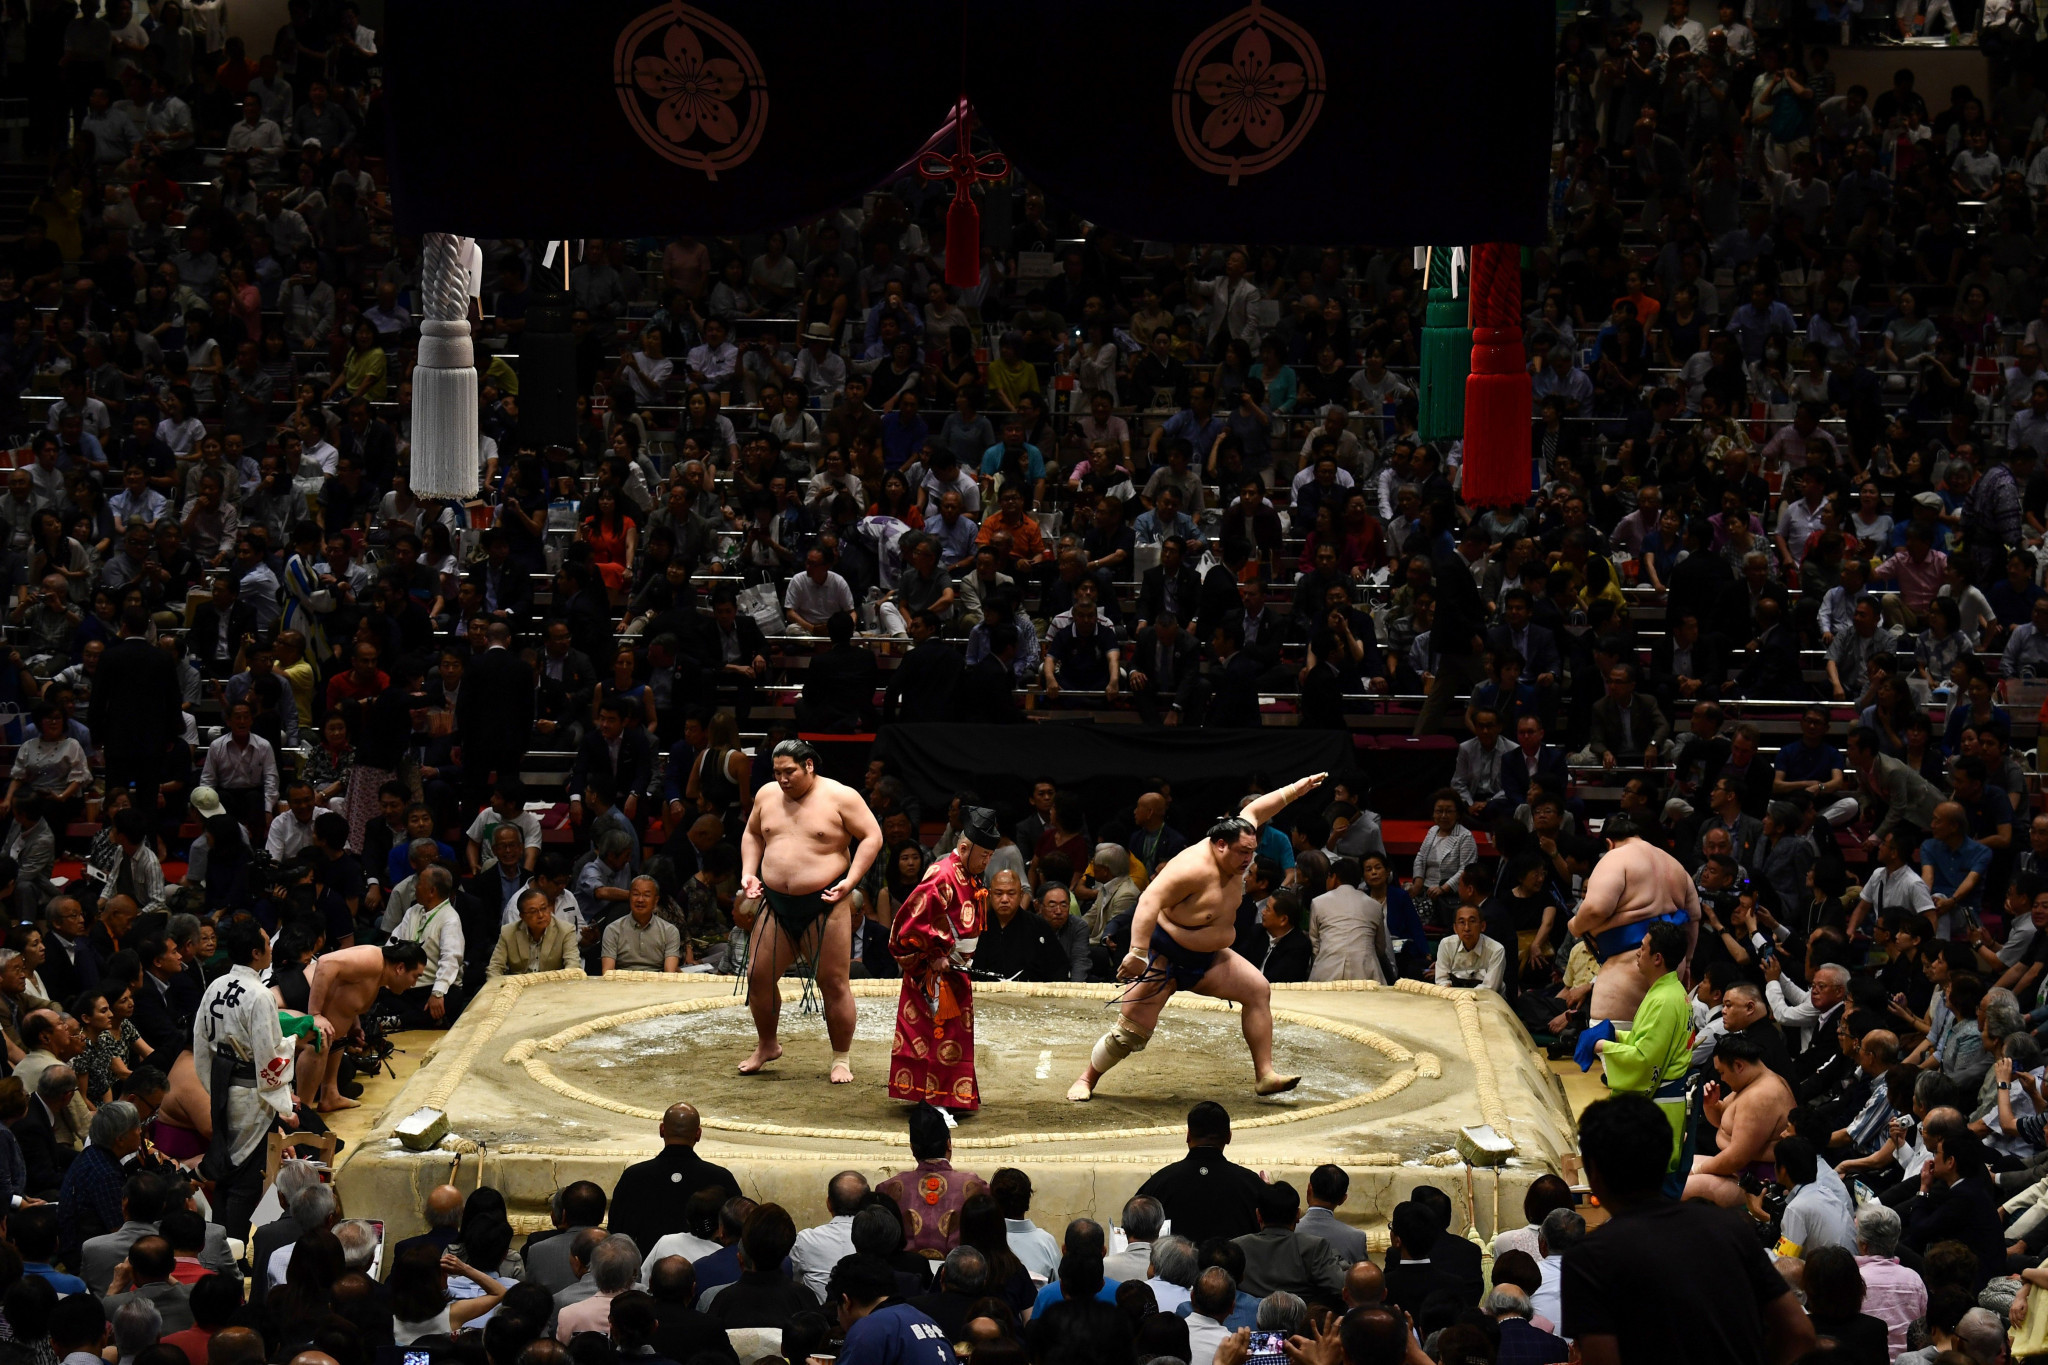 Fans to be allowed into Japanese sumo tournament in Tokyo